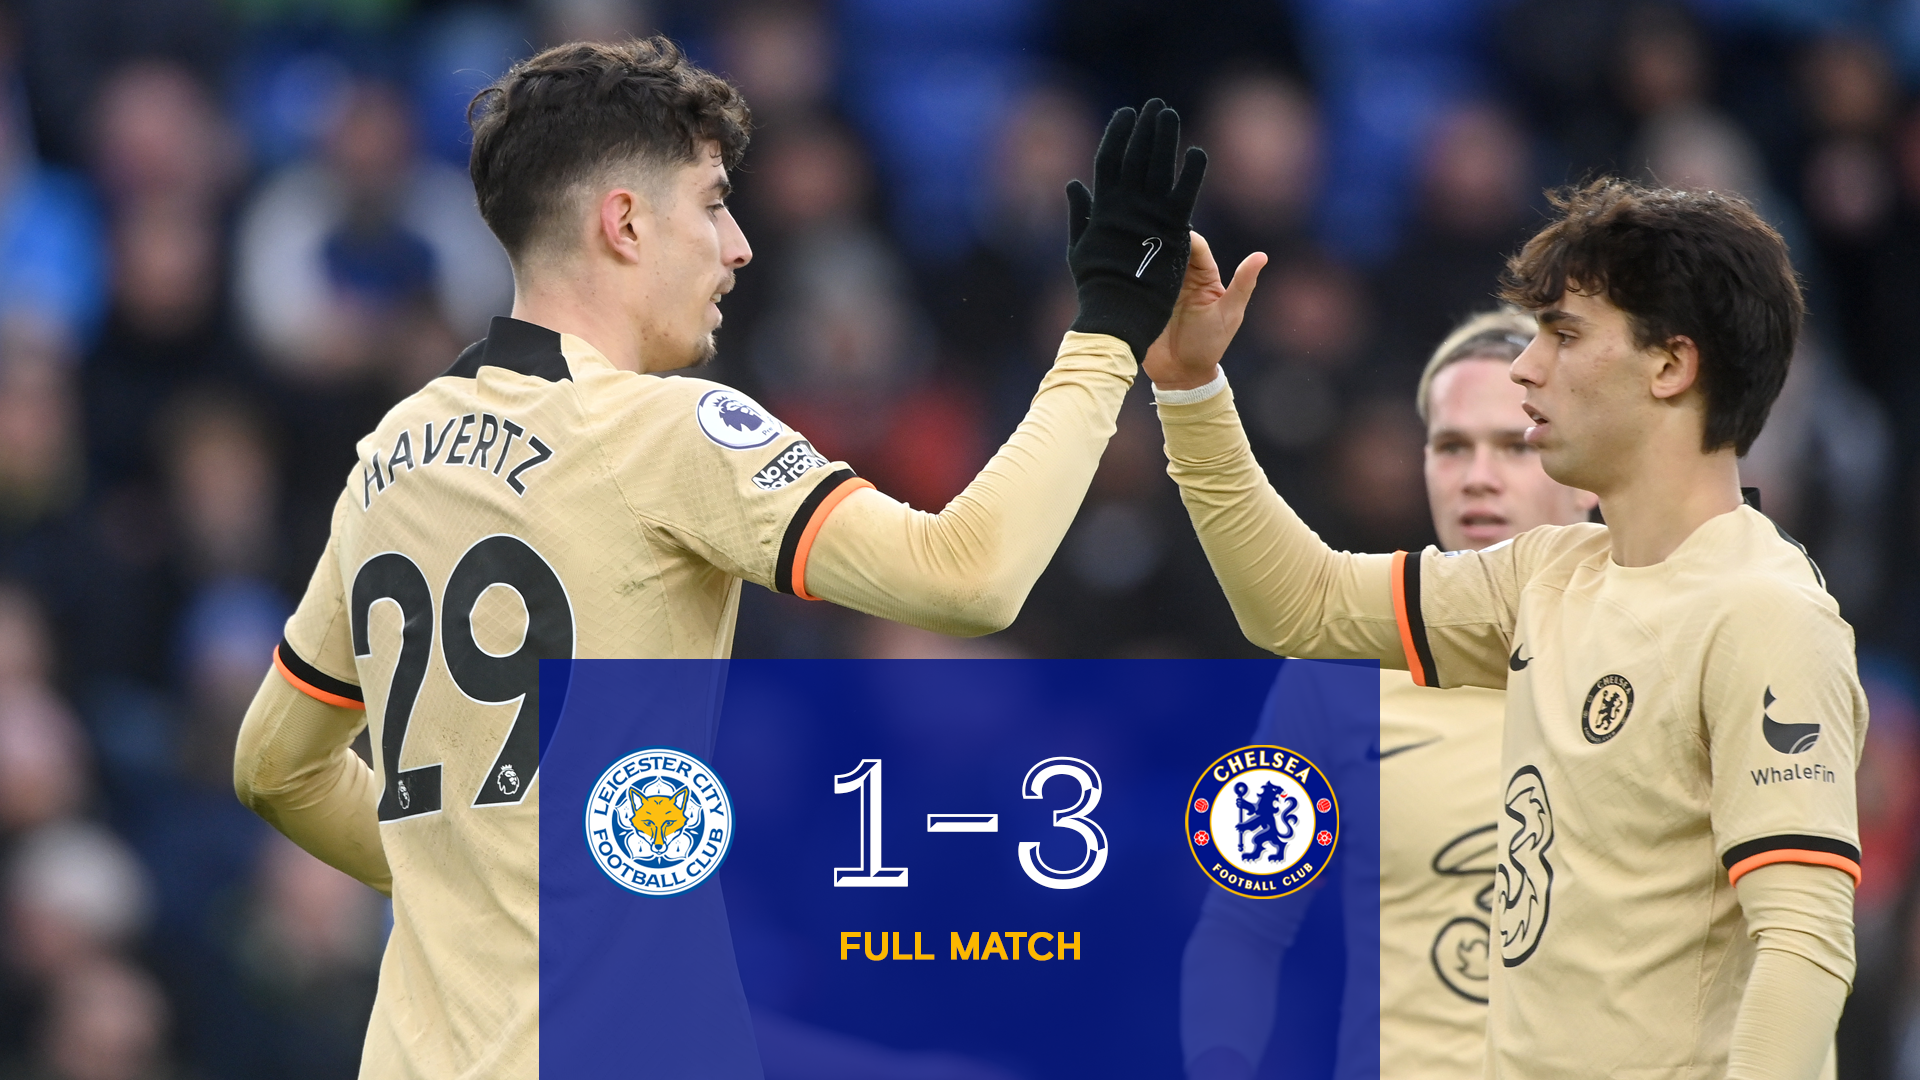 Full Match Leicester 1-3 Chelsea Video Official Site Chelsea Football Club